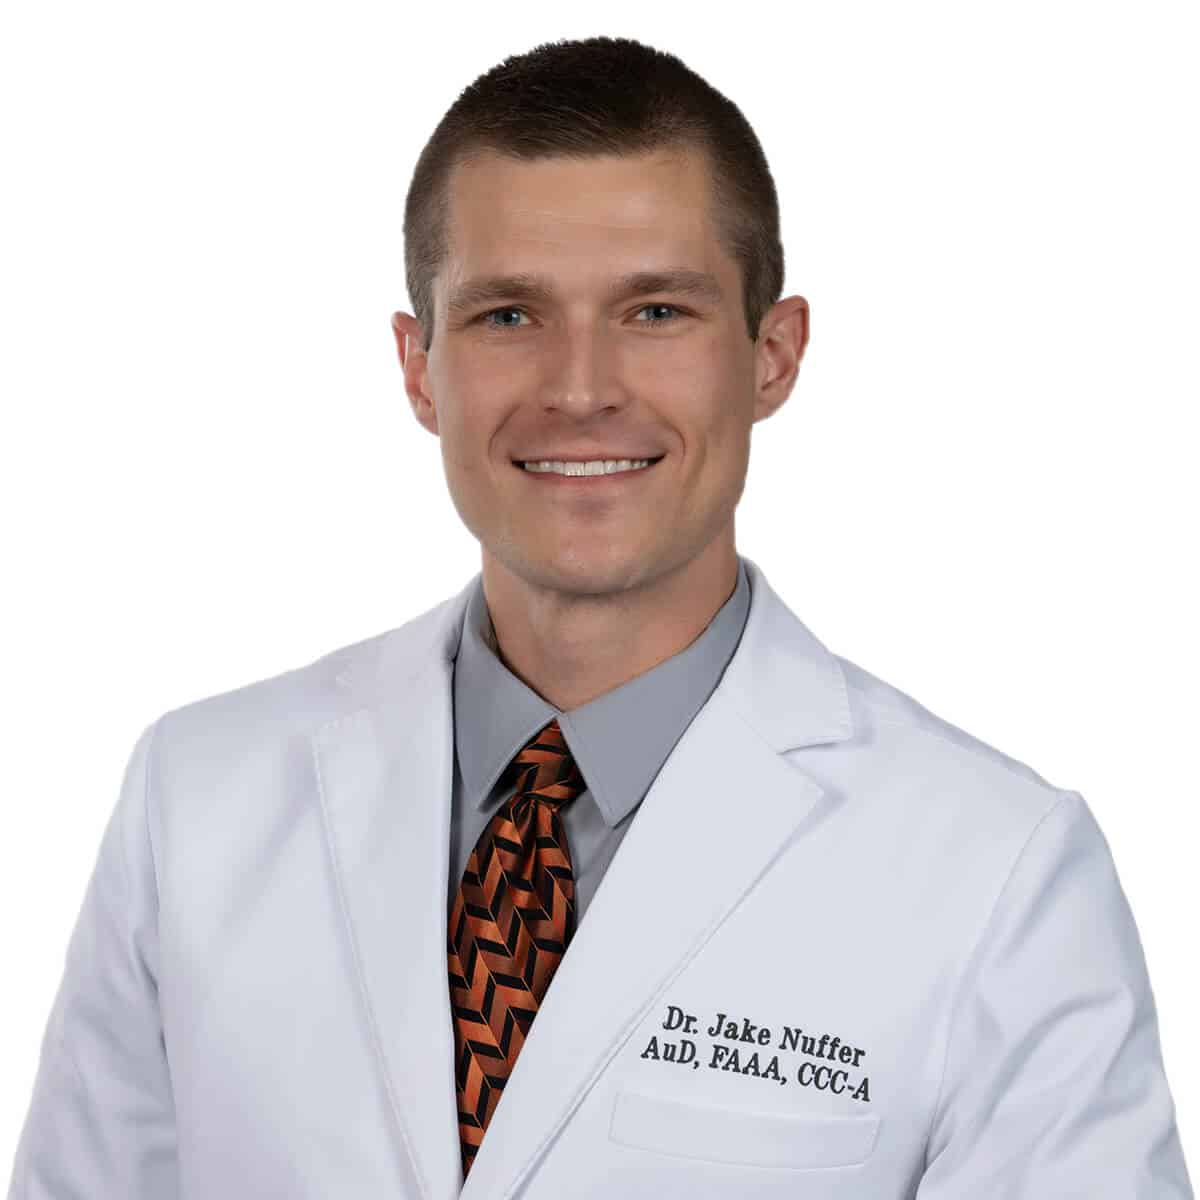 Dr. Jake Nuffer, AuD